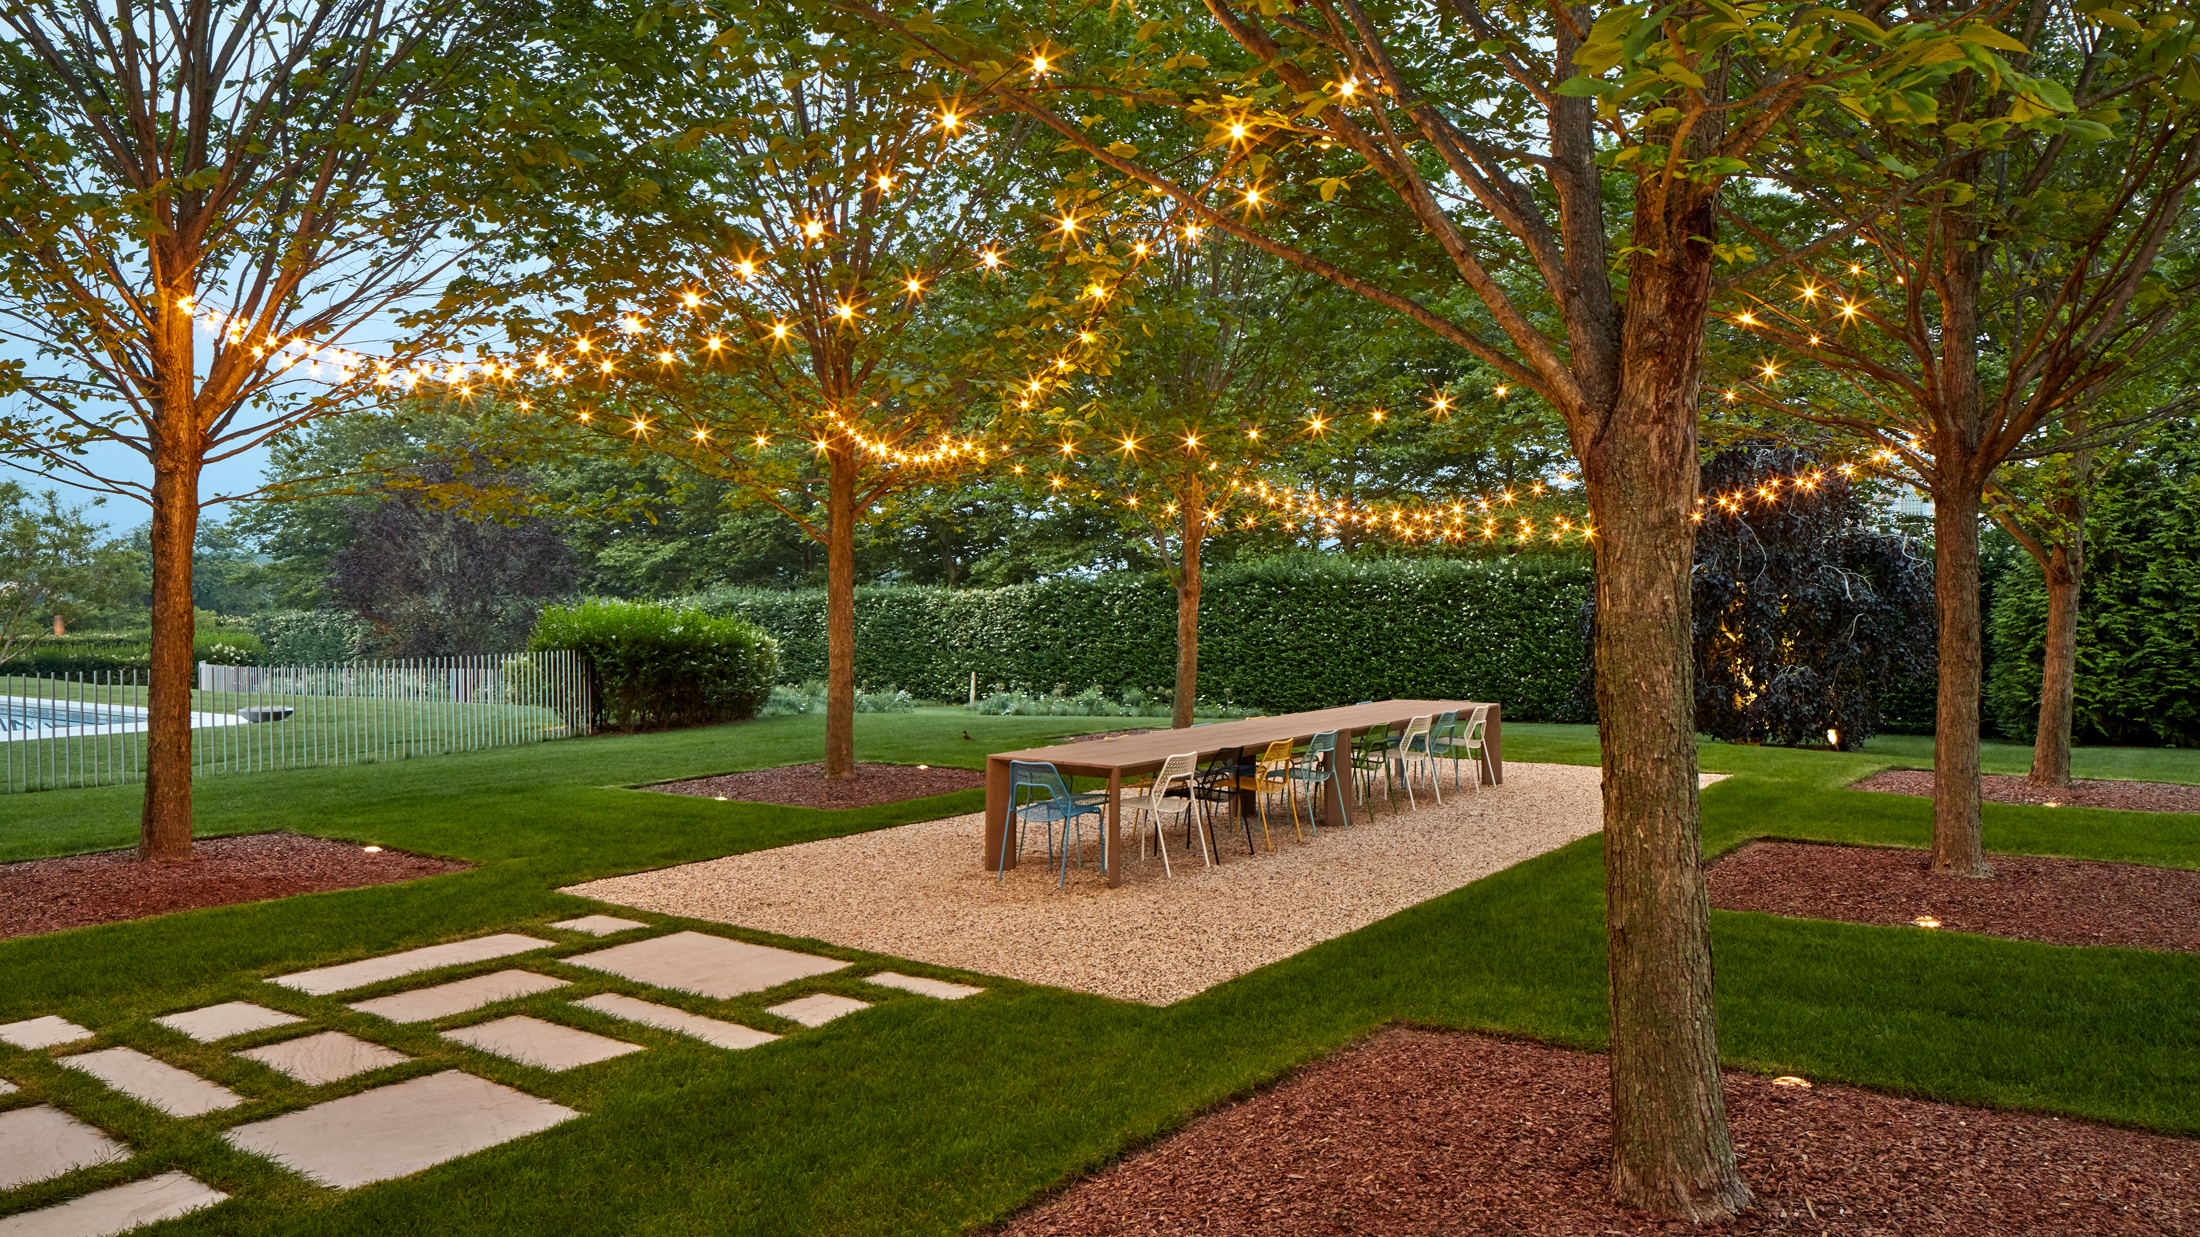 Lighting in another way to enjoy outdoor space into the evening hours. 